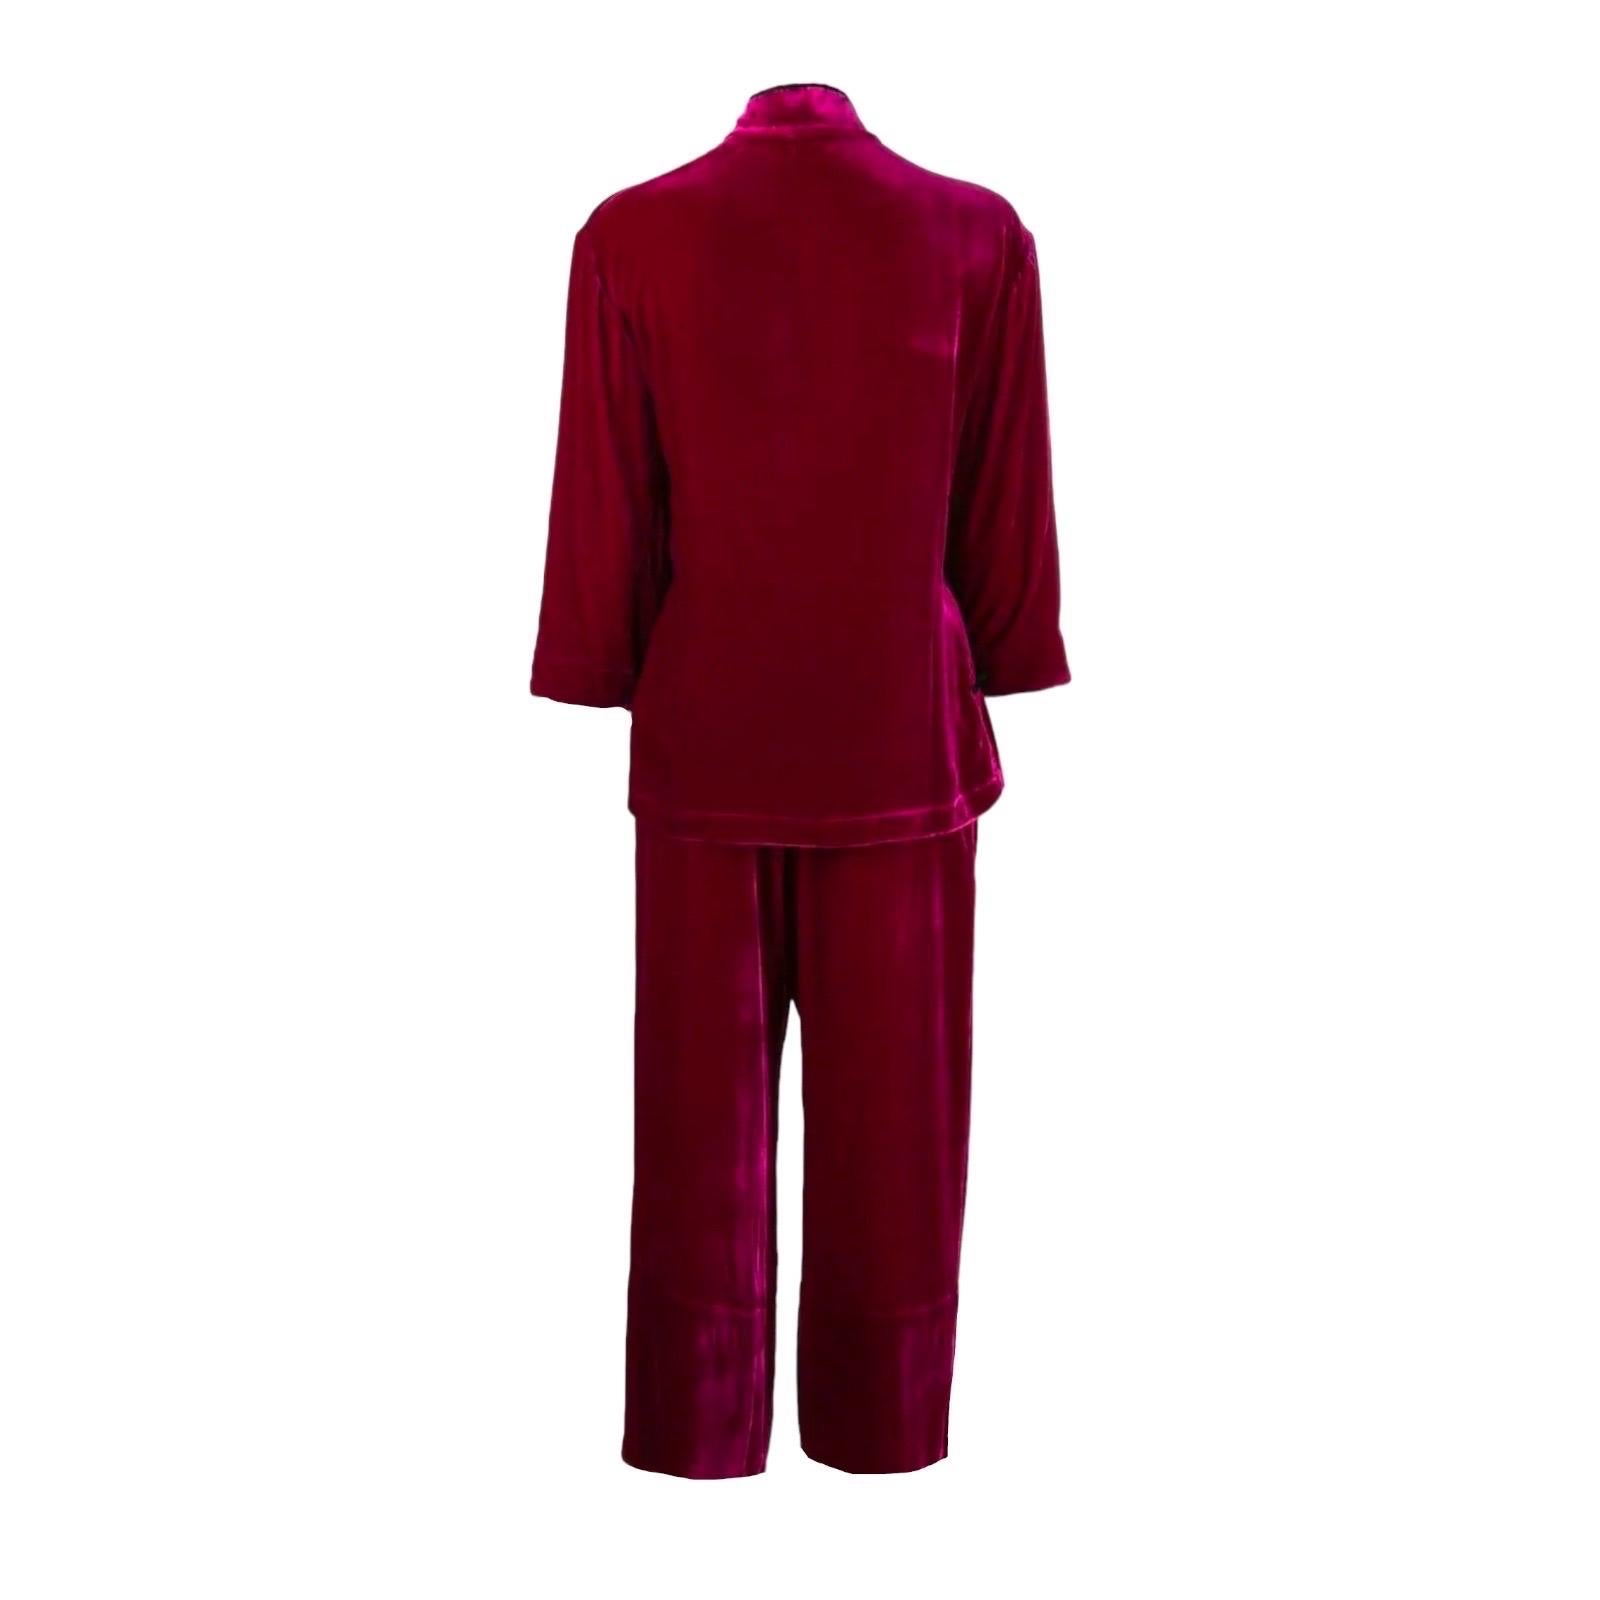 A stunning velvet lounge suit by Olivia von Halle.
This amazing suit is consisting of 2 pieces - the jacket and pants.

This stunning suit is cut in a relaxed fit and creates an effortless elegant & luxurious look.

The top features long sleeves, a